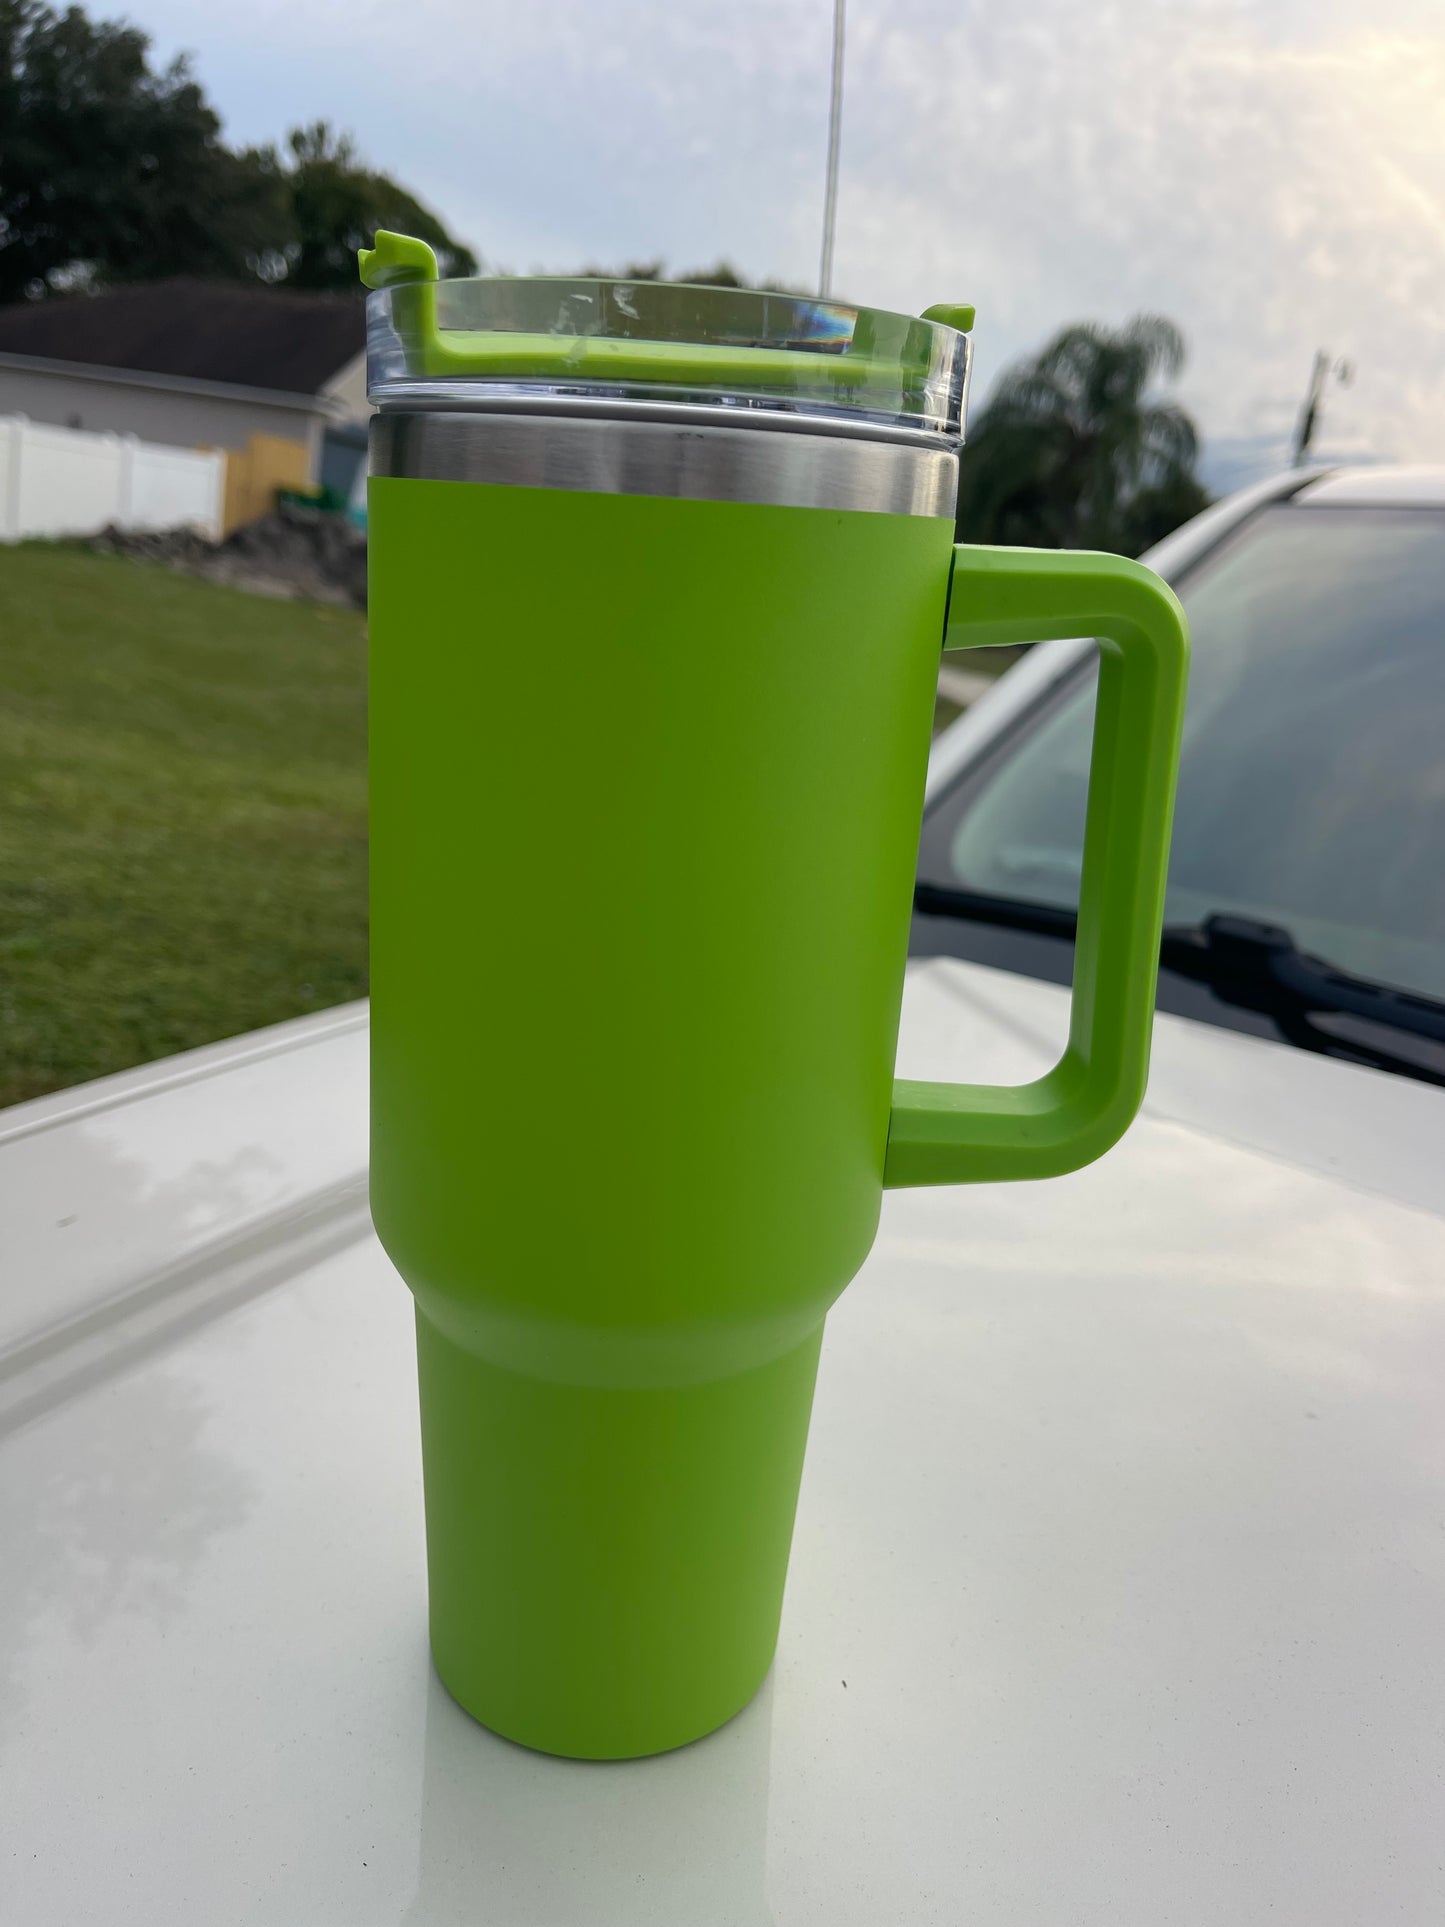 40 oz stainless steel tumbler with handle. Lime green